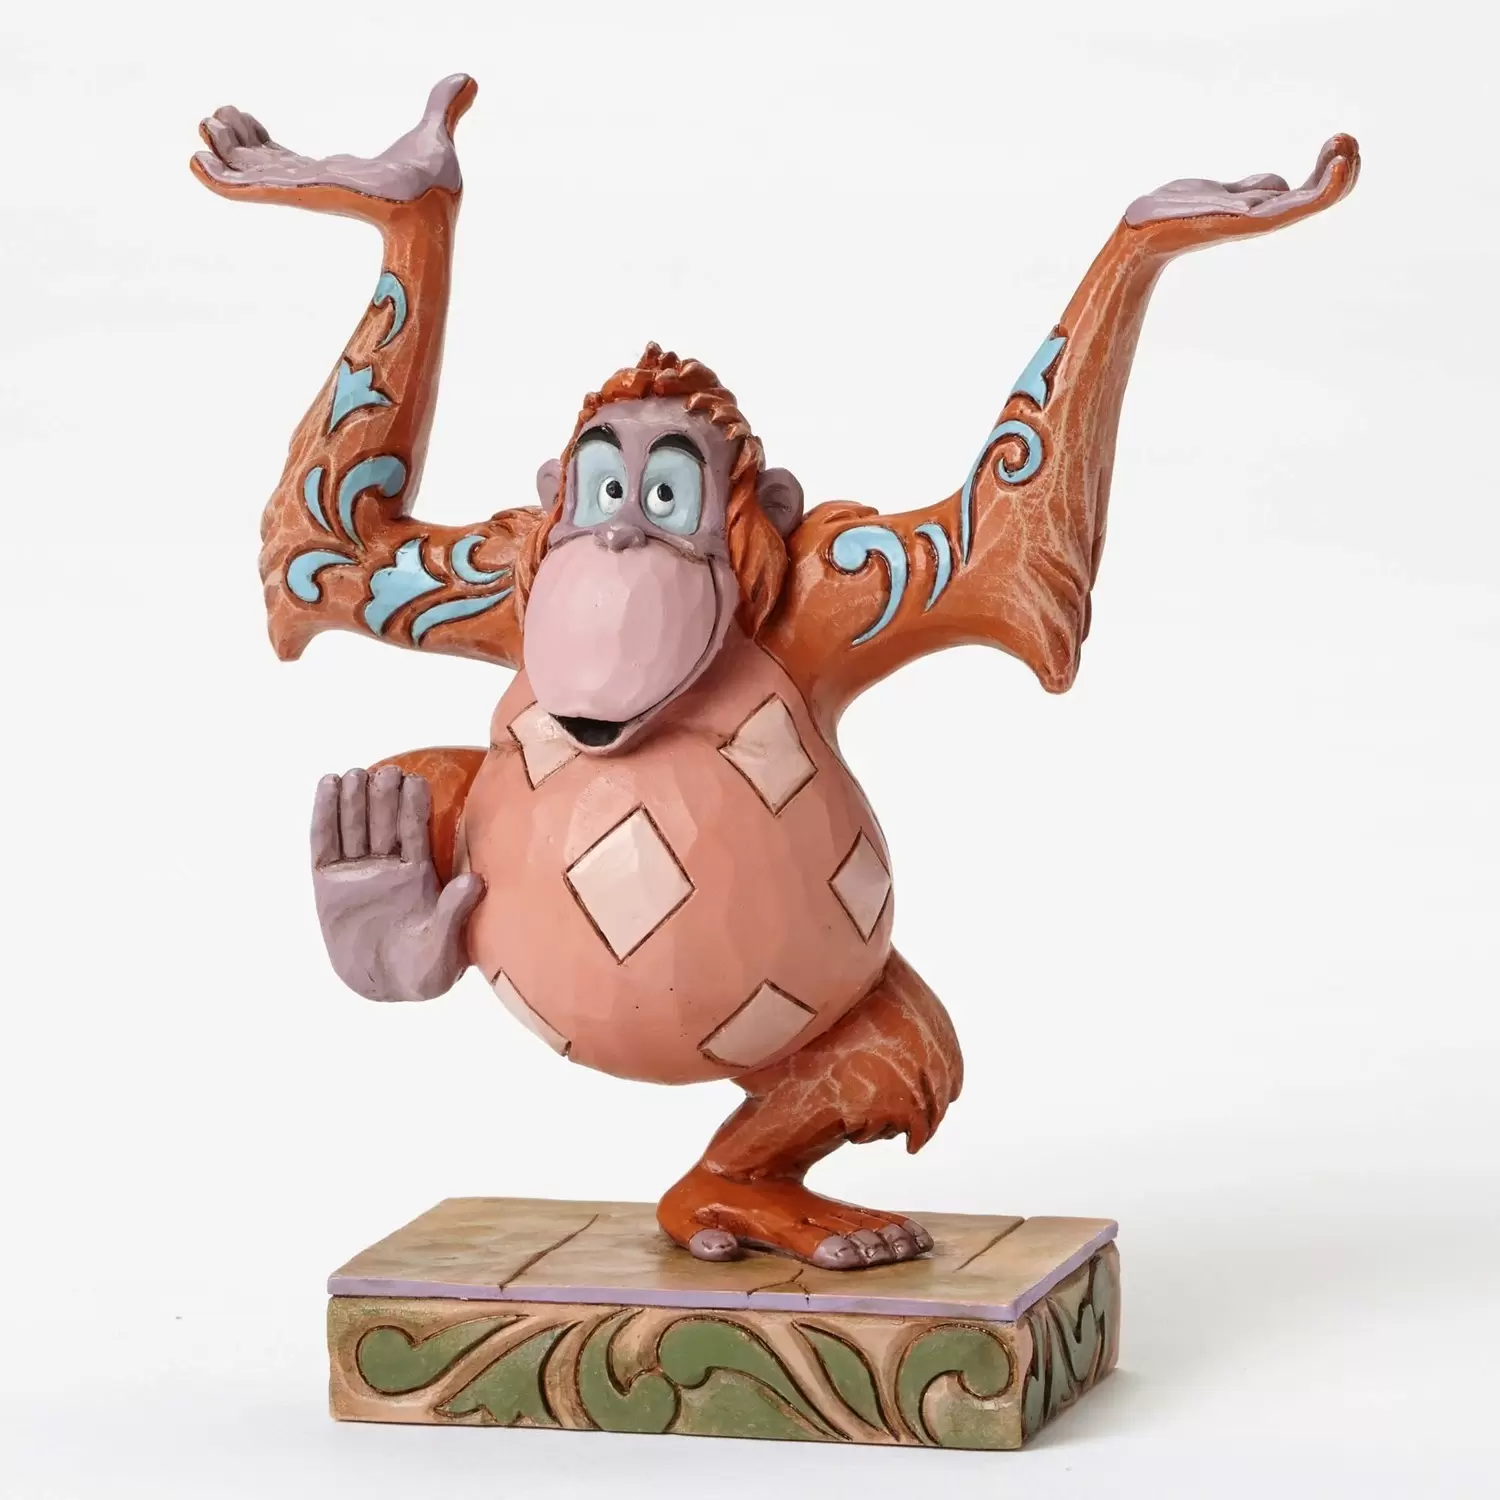 Disney Traditions by Jim Shore - Jungle VIP - King Louie from Jungle Book